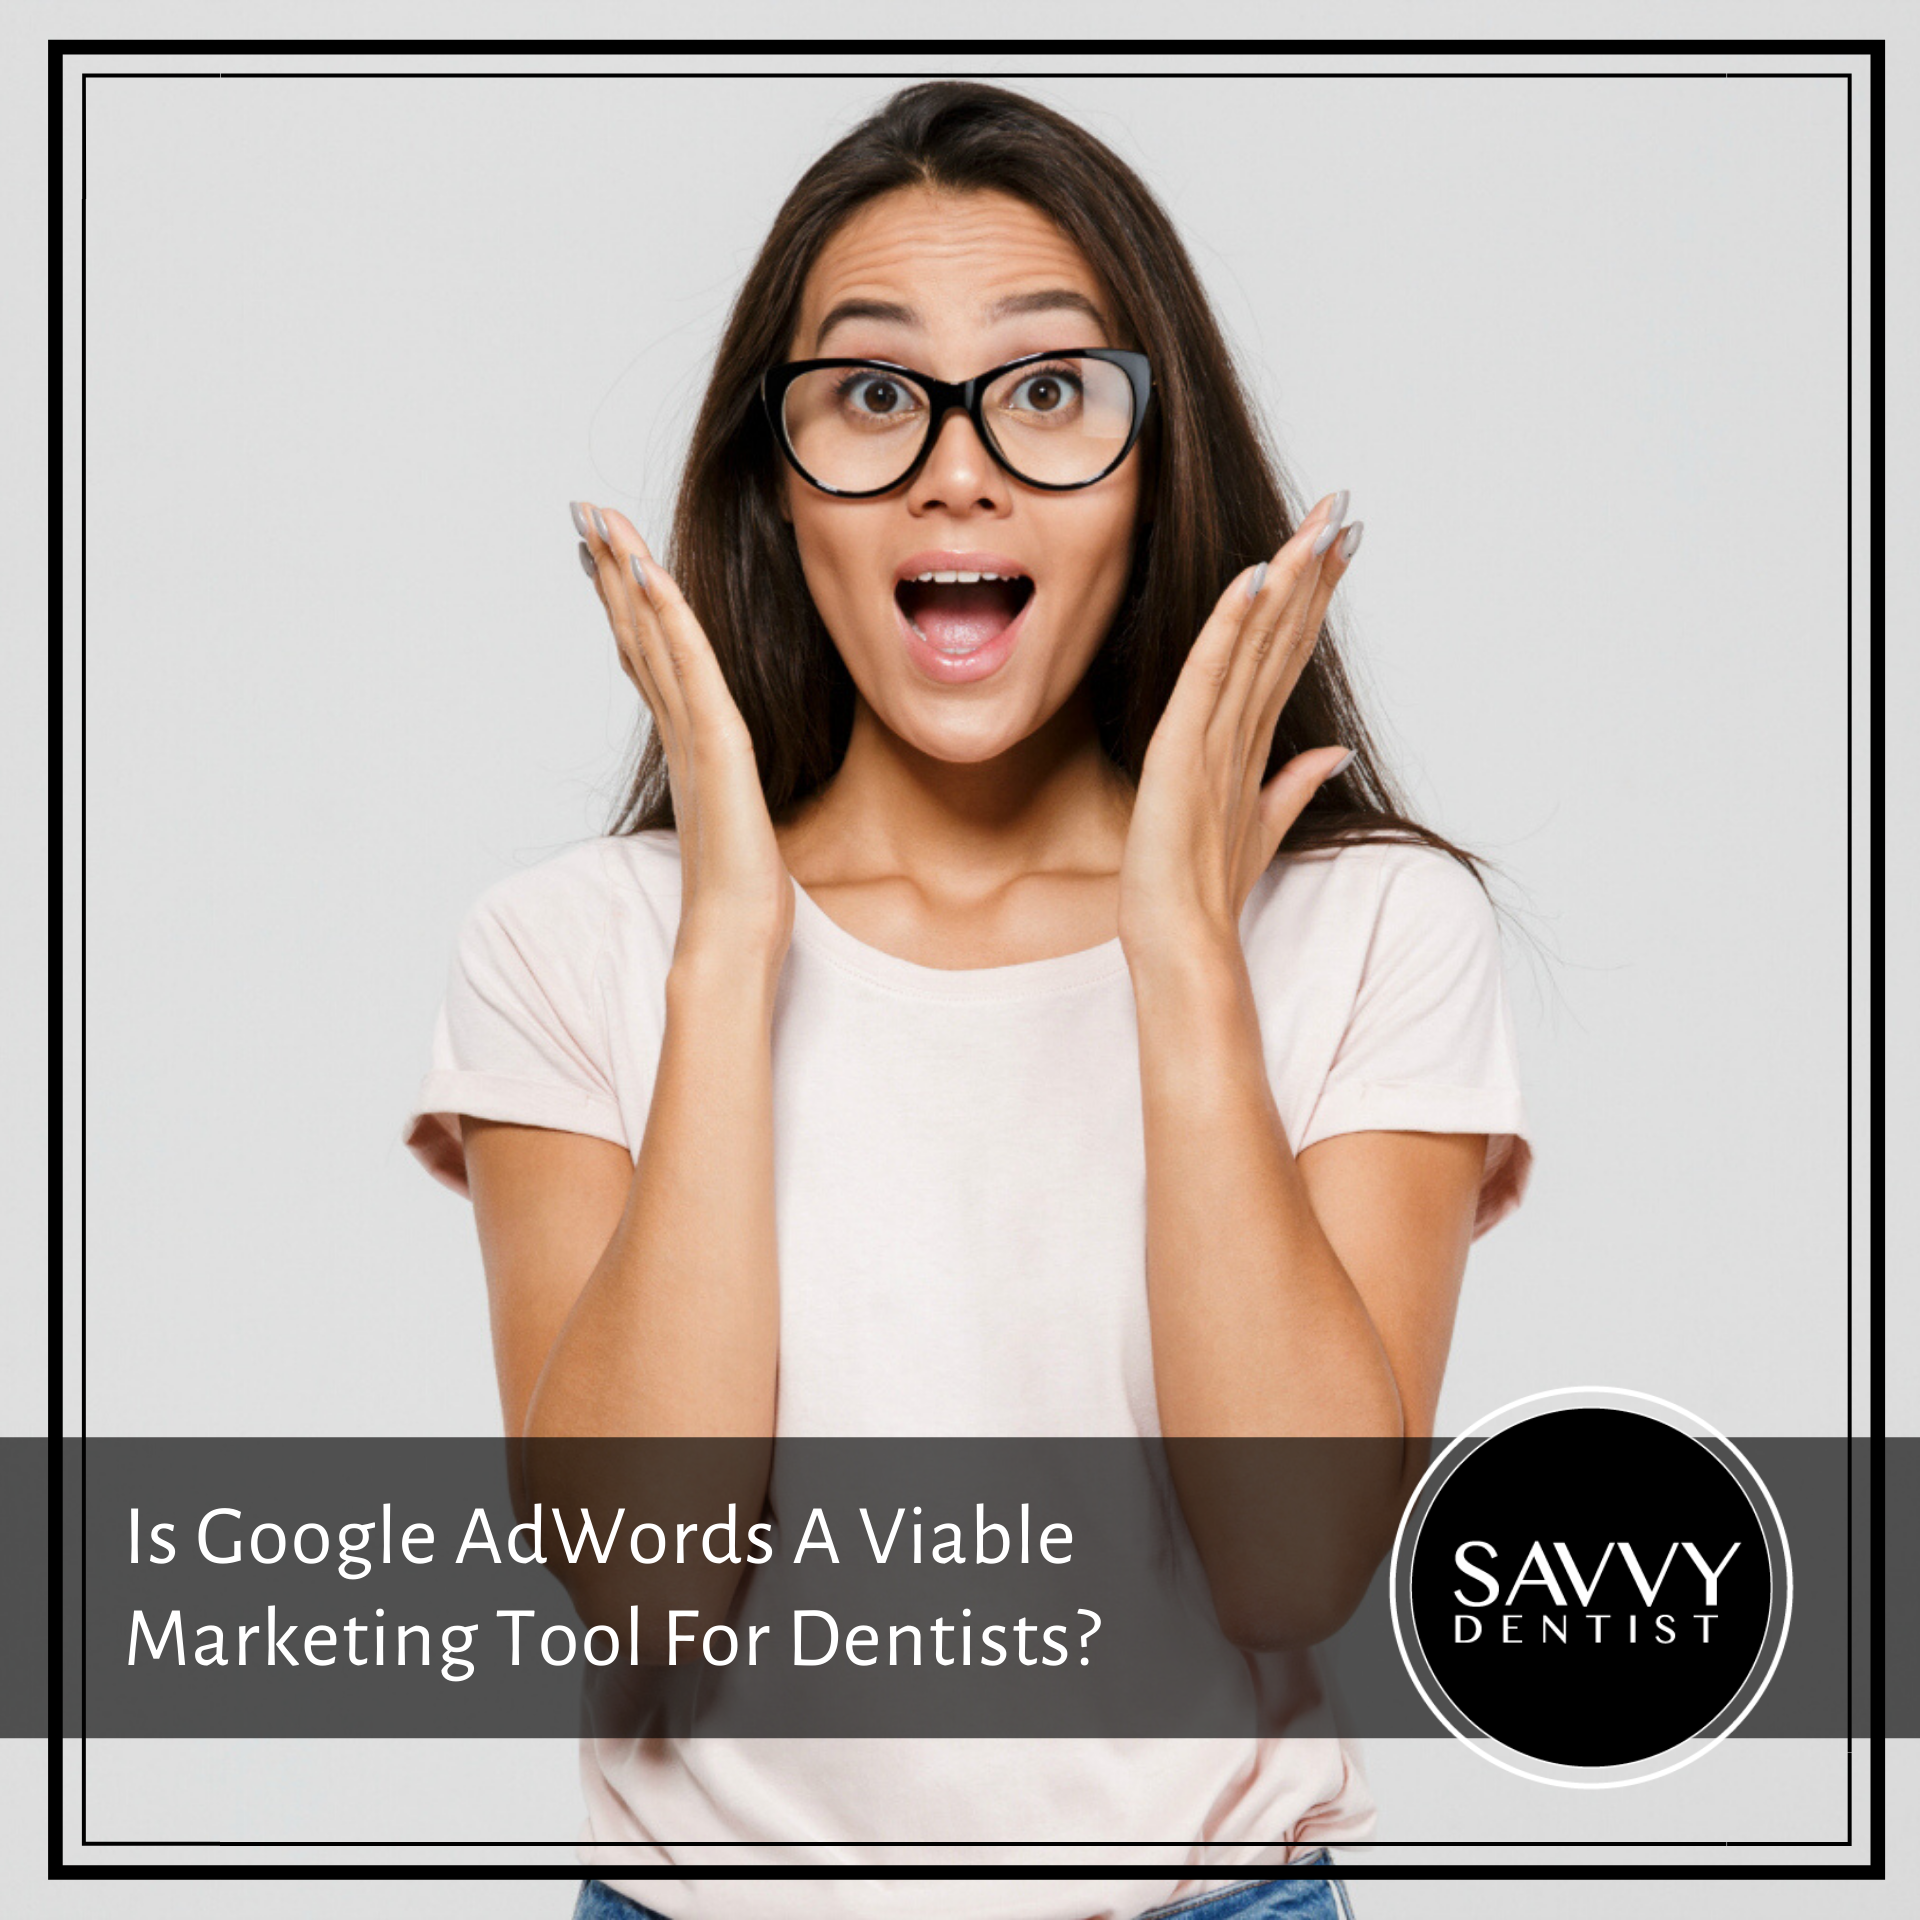 Is Google AdWords A Viable Marketing Tool For Dentists?